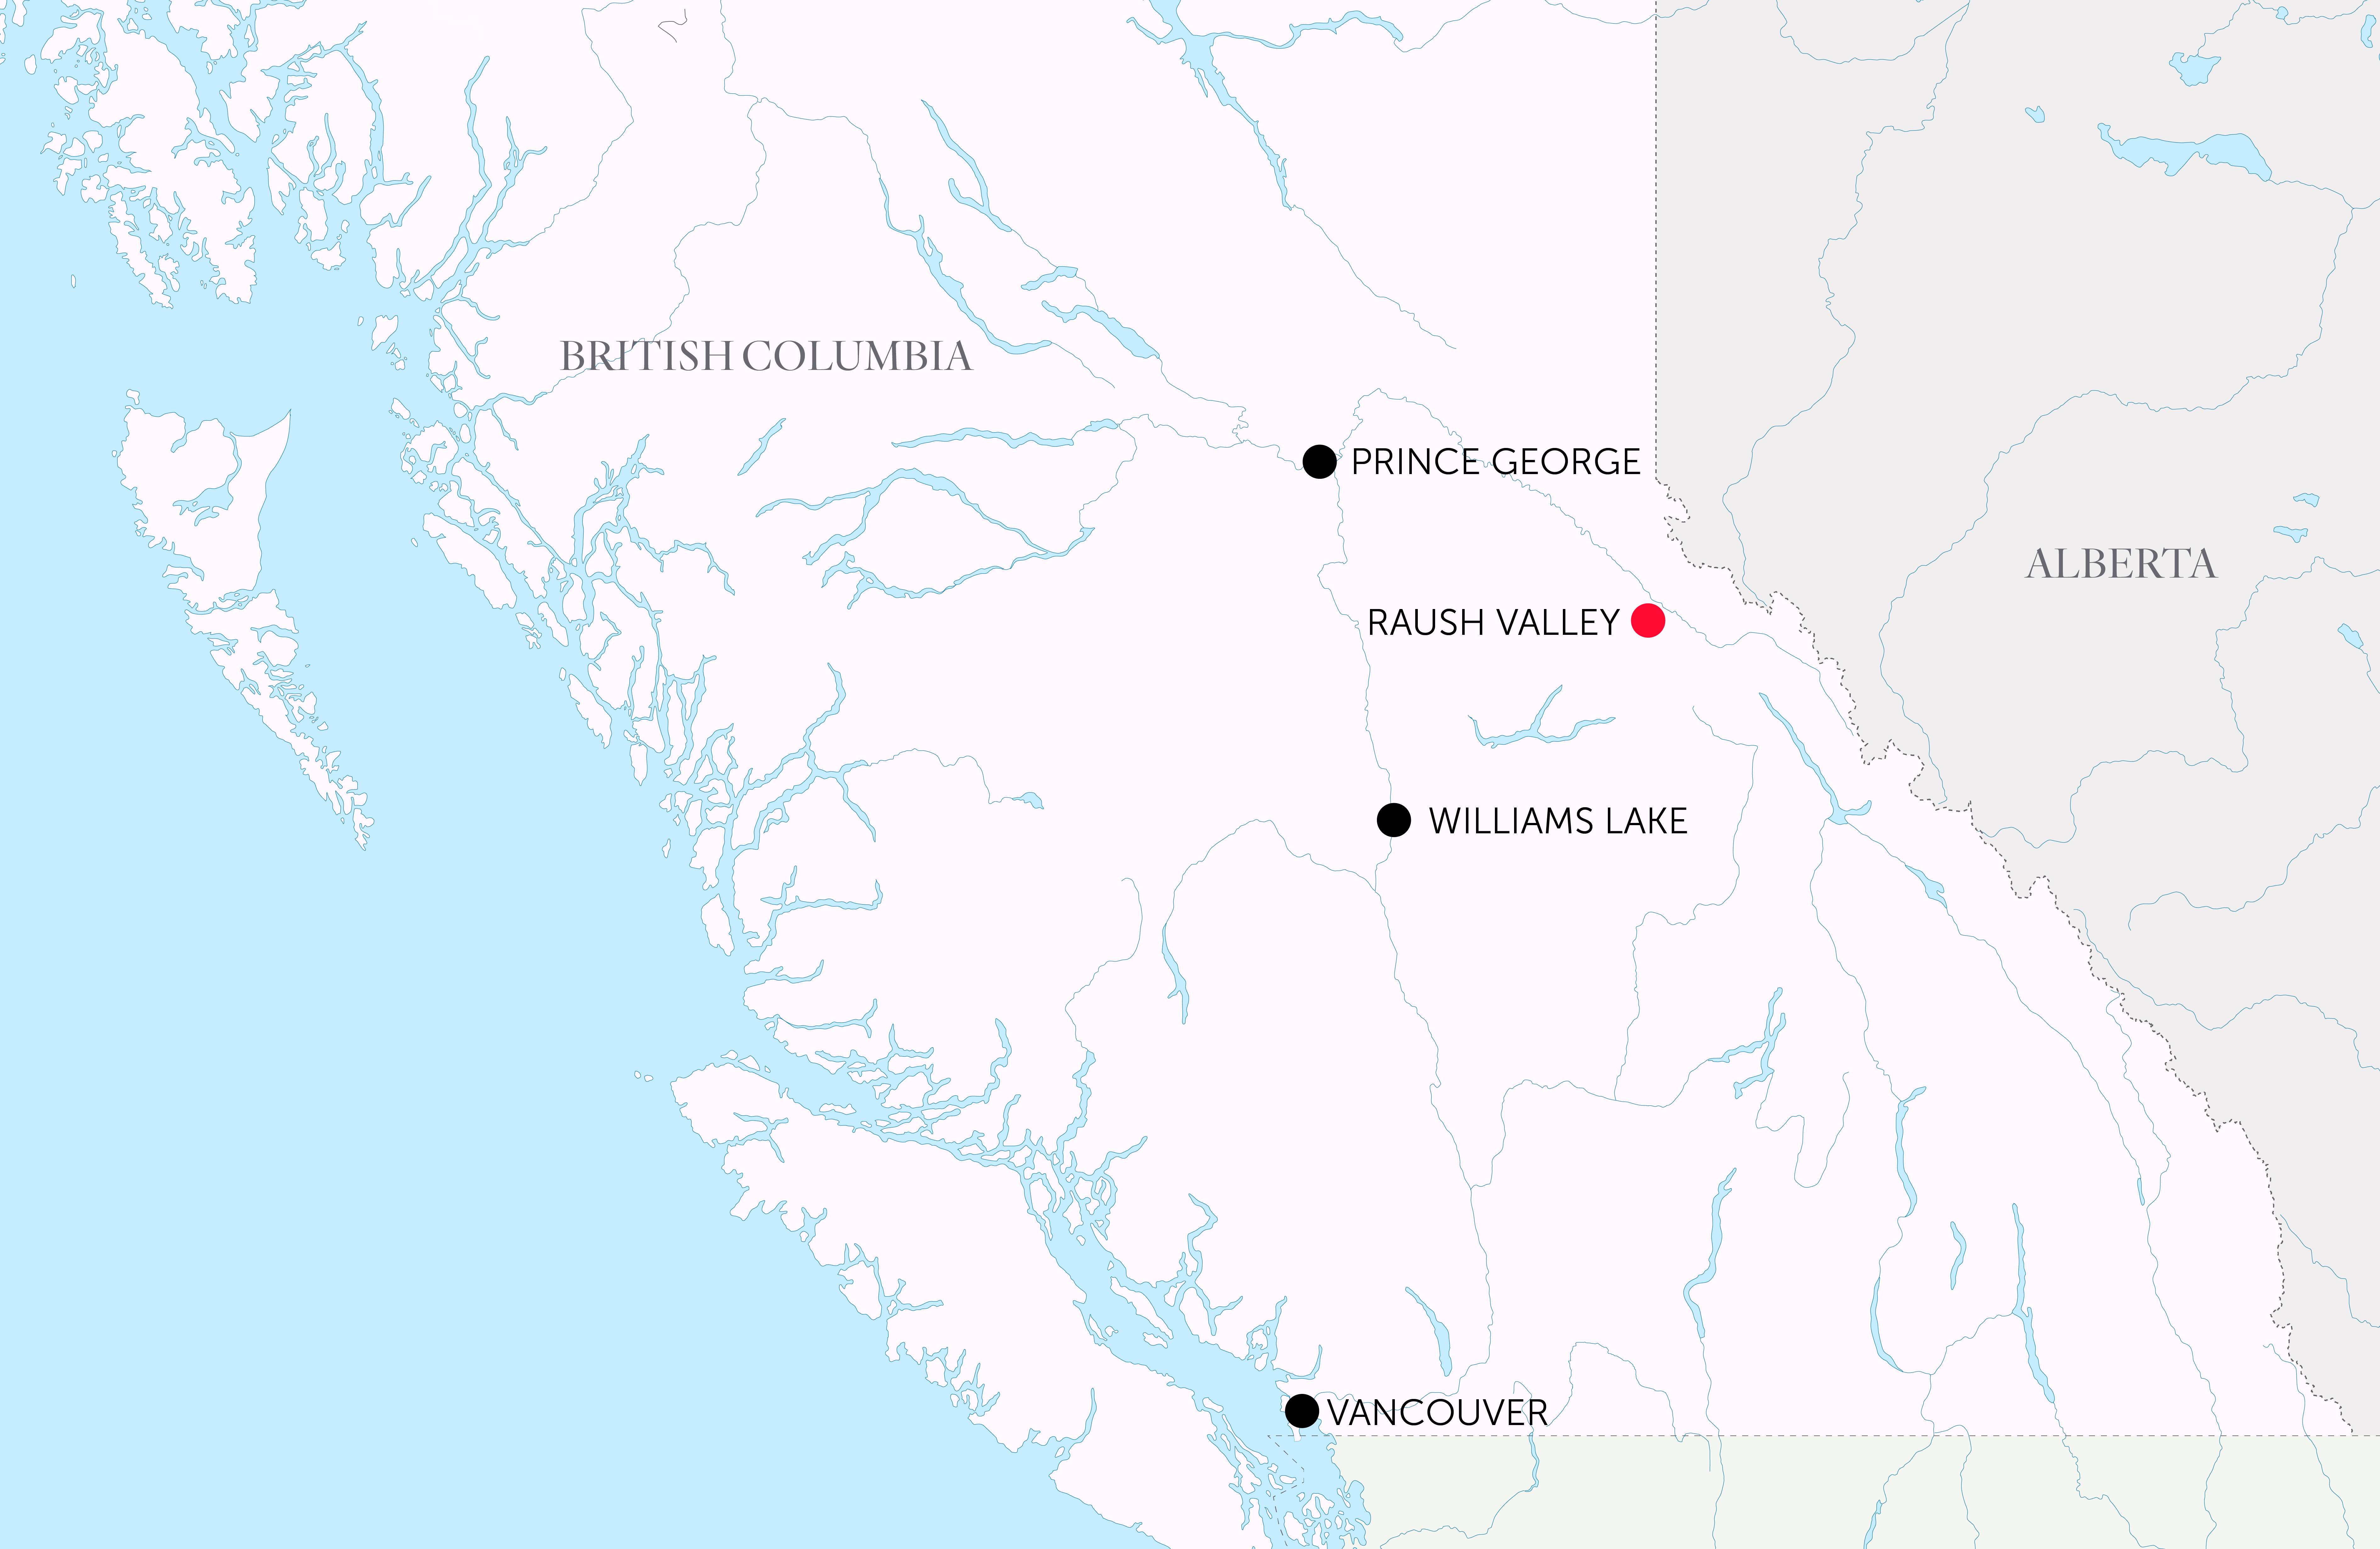 A map showing the Raush Valley situated between Prince George, B.C., and Williams Lake, B.C.